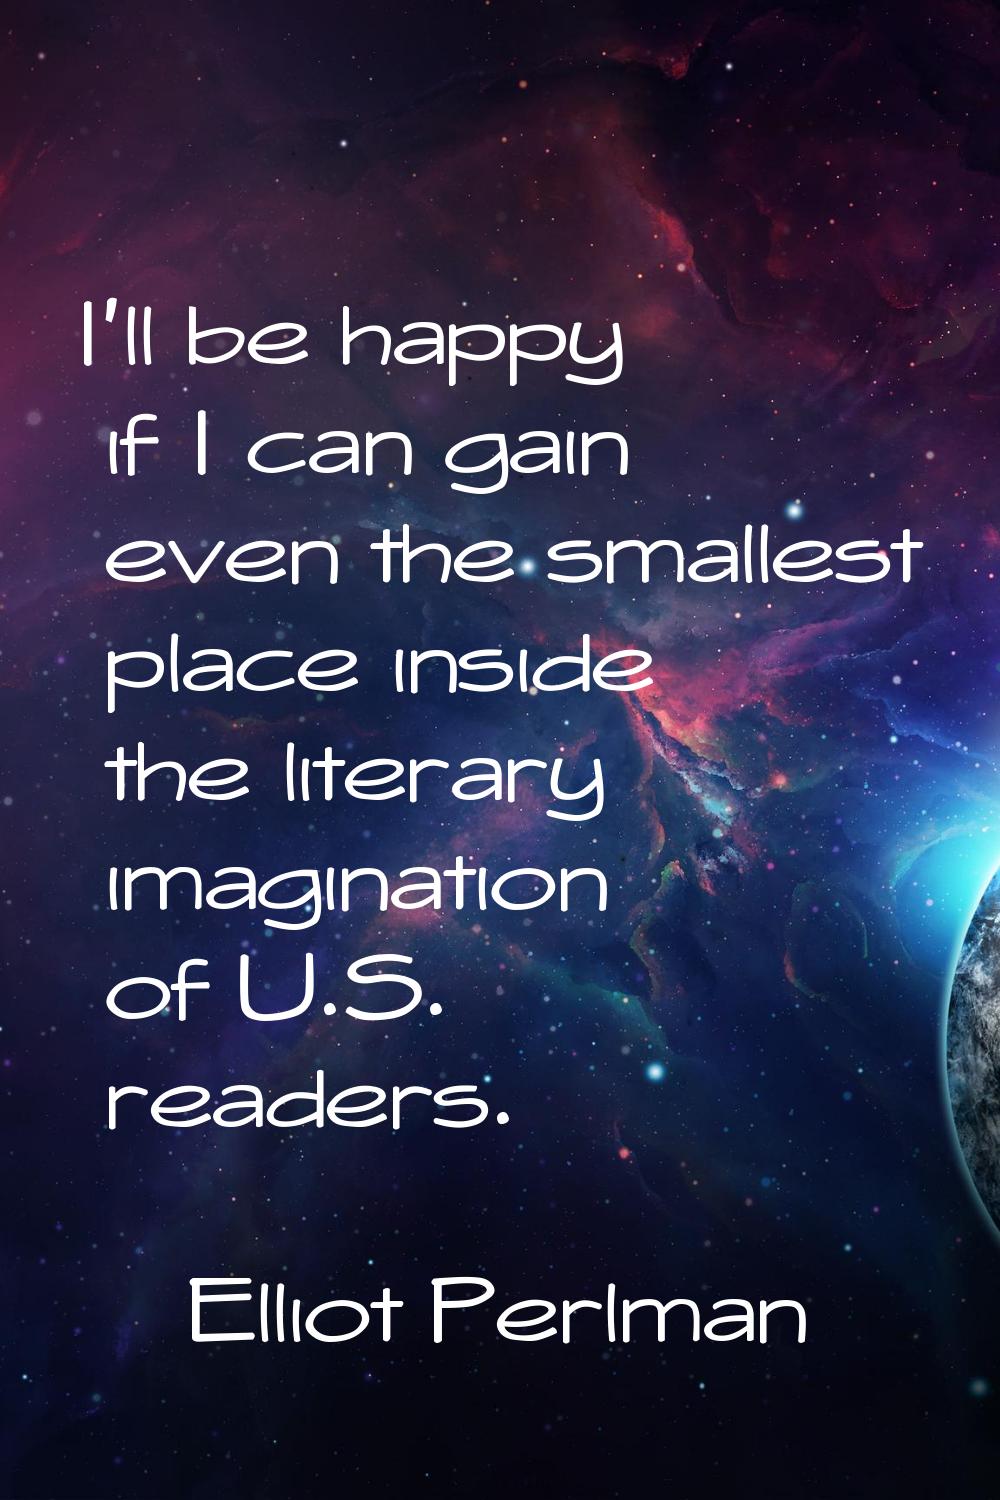 I'll be happy if I can gain even the smallest place inside the literary imagination of U.S. readers